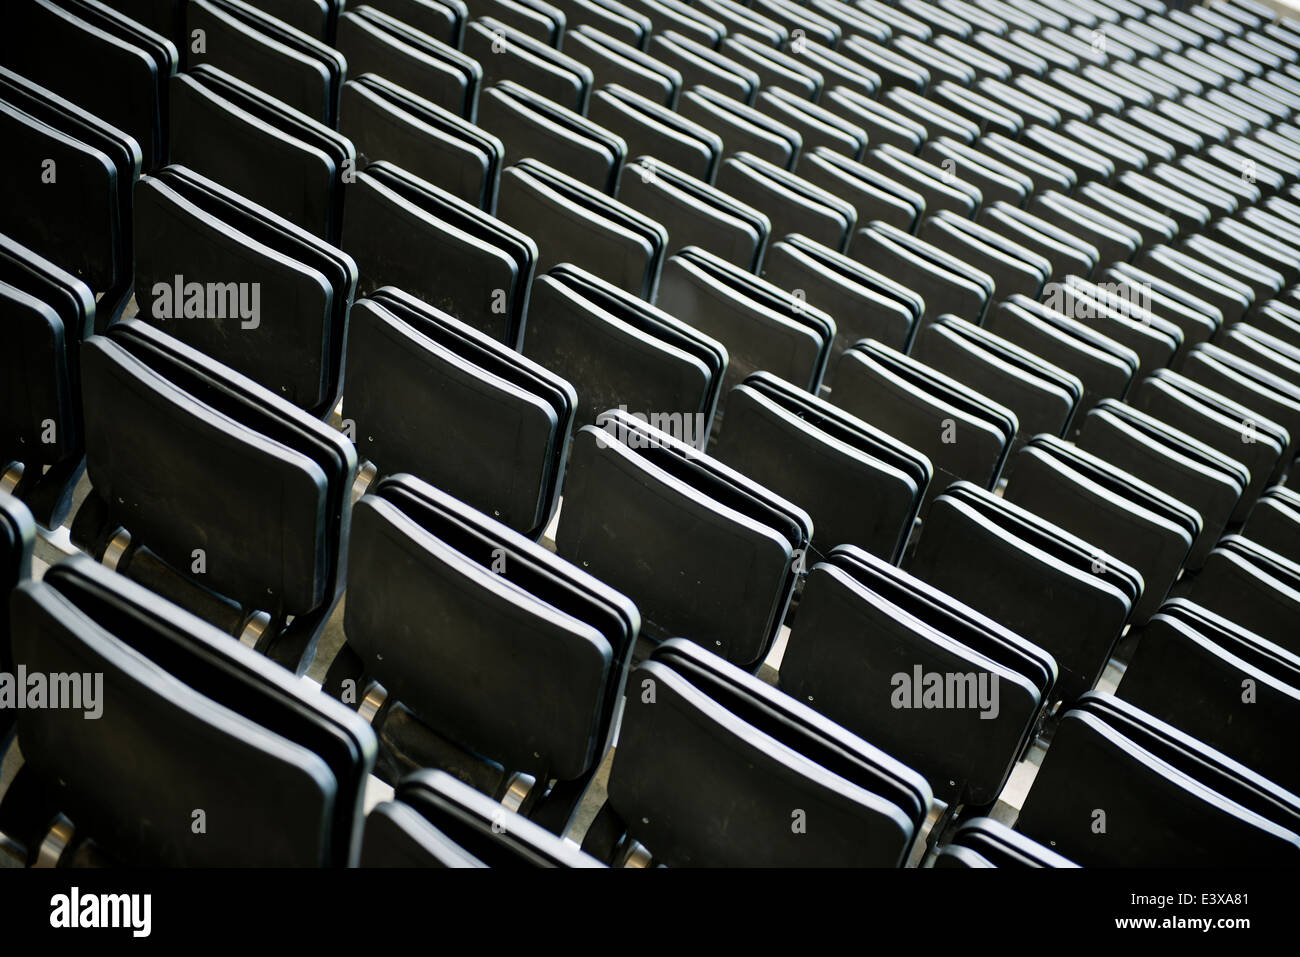 Rows of empty seats for spectators at a football ground. Stock Photo